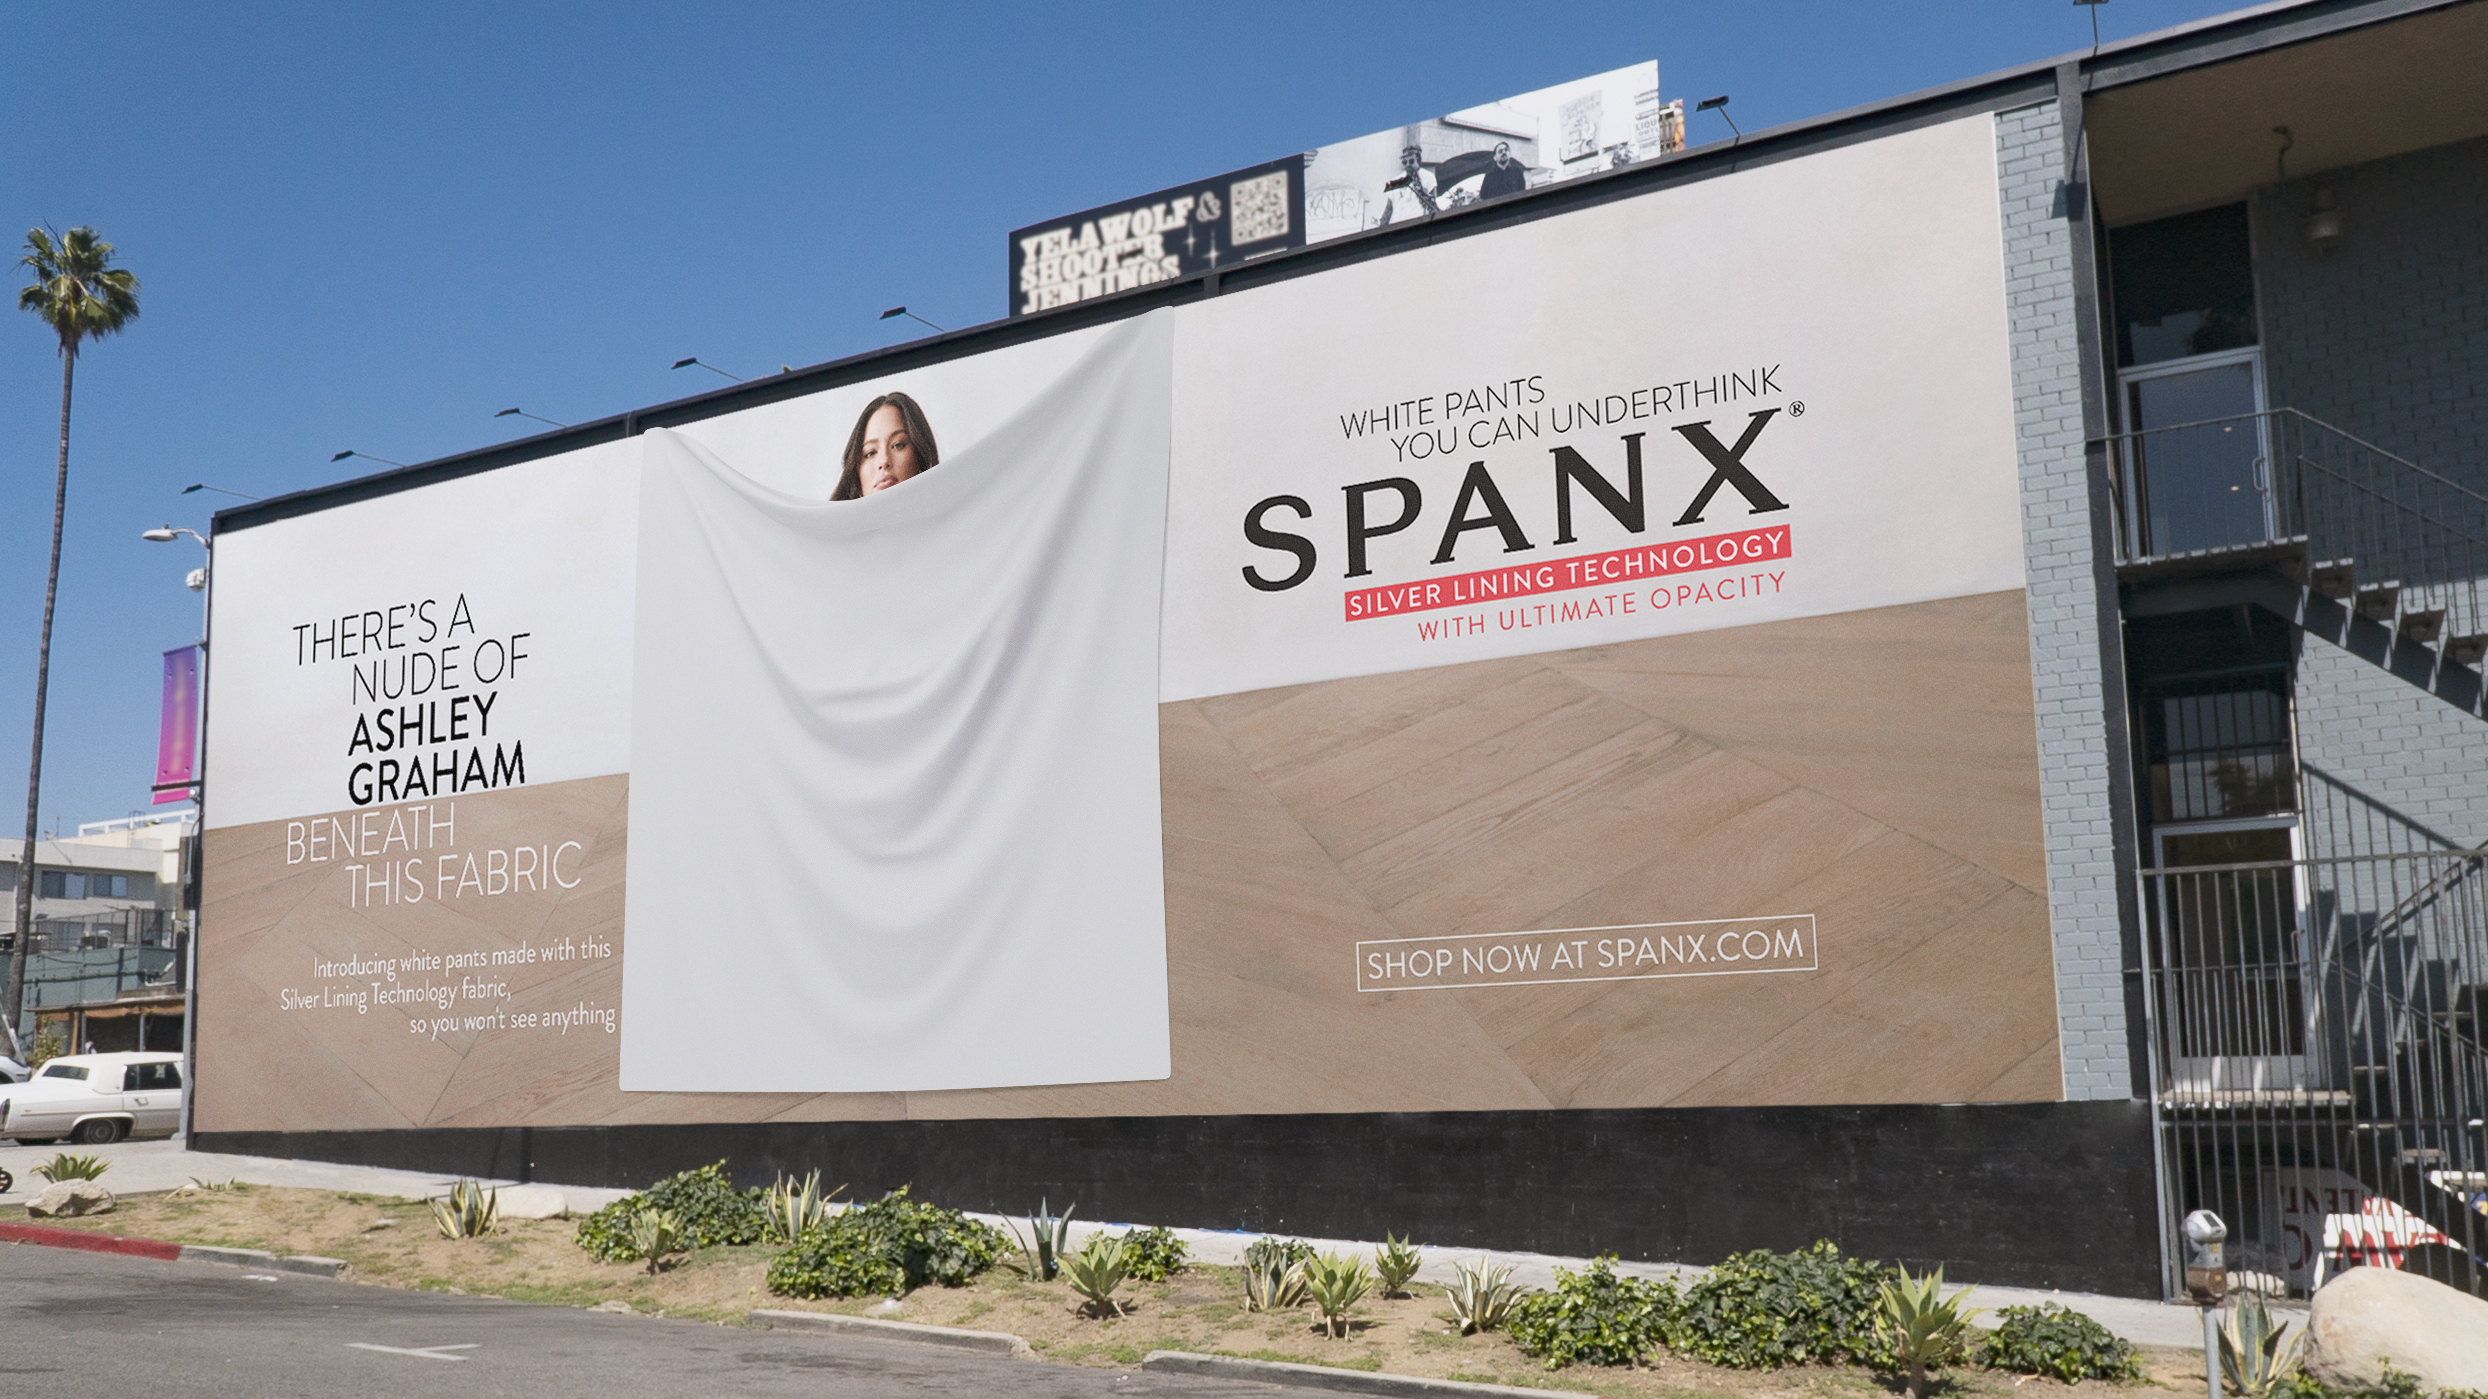 Mirror, Mirror: There's a place for Spanx